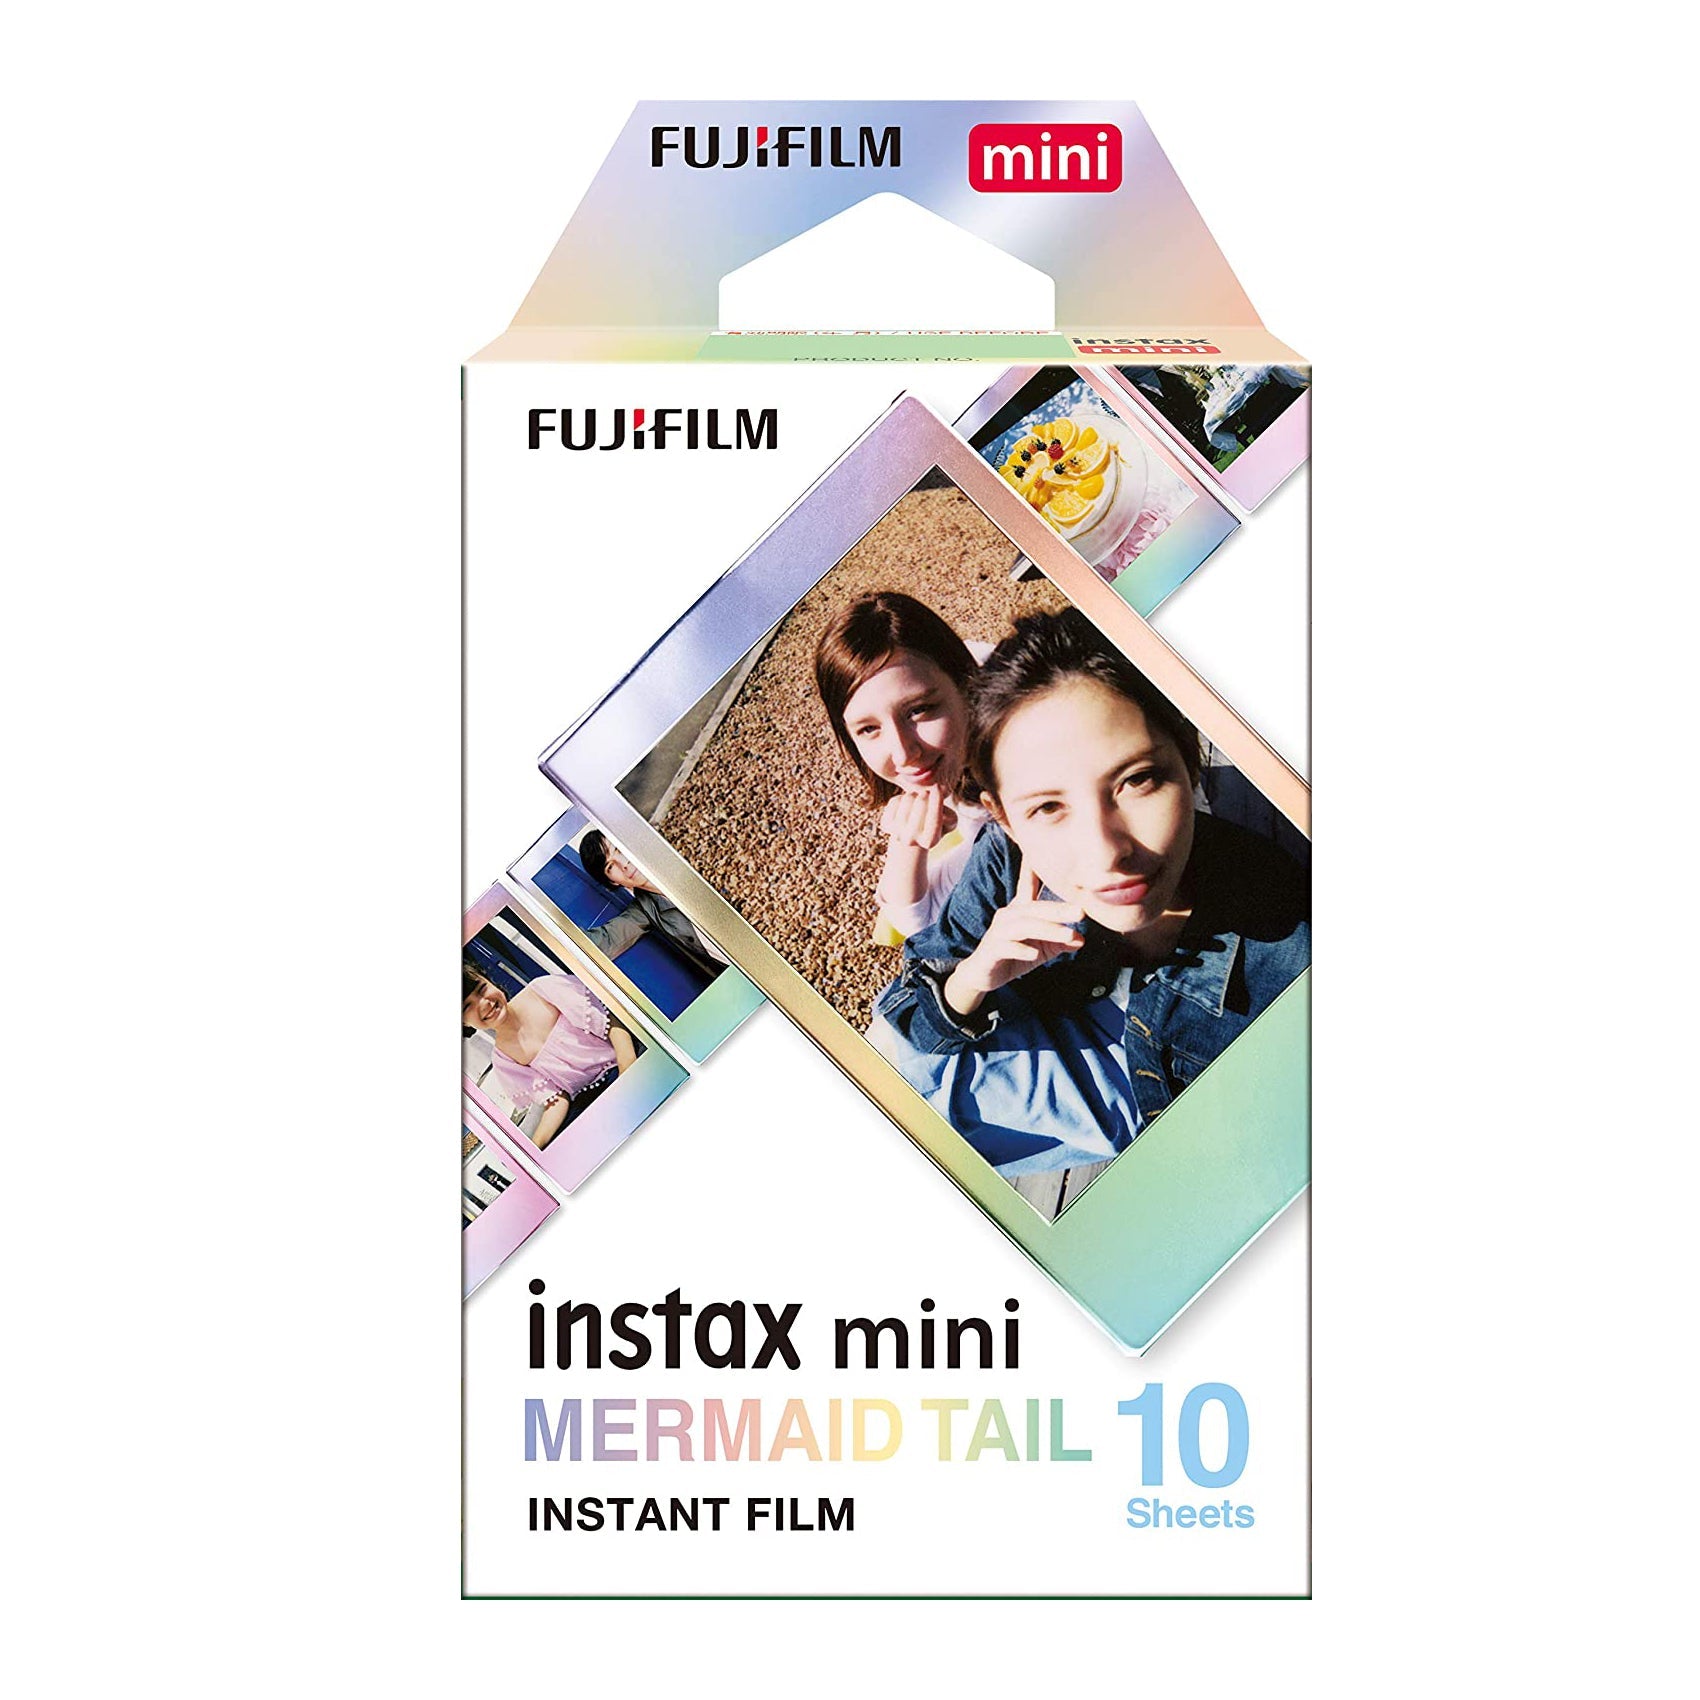 Fujifilm Instax Mini 10X1 mermaid tail Instant Film with Instax Time Photo Album 64 Sheets (rose red)